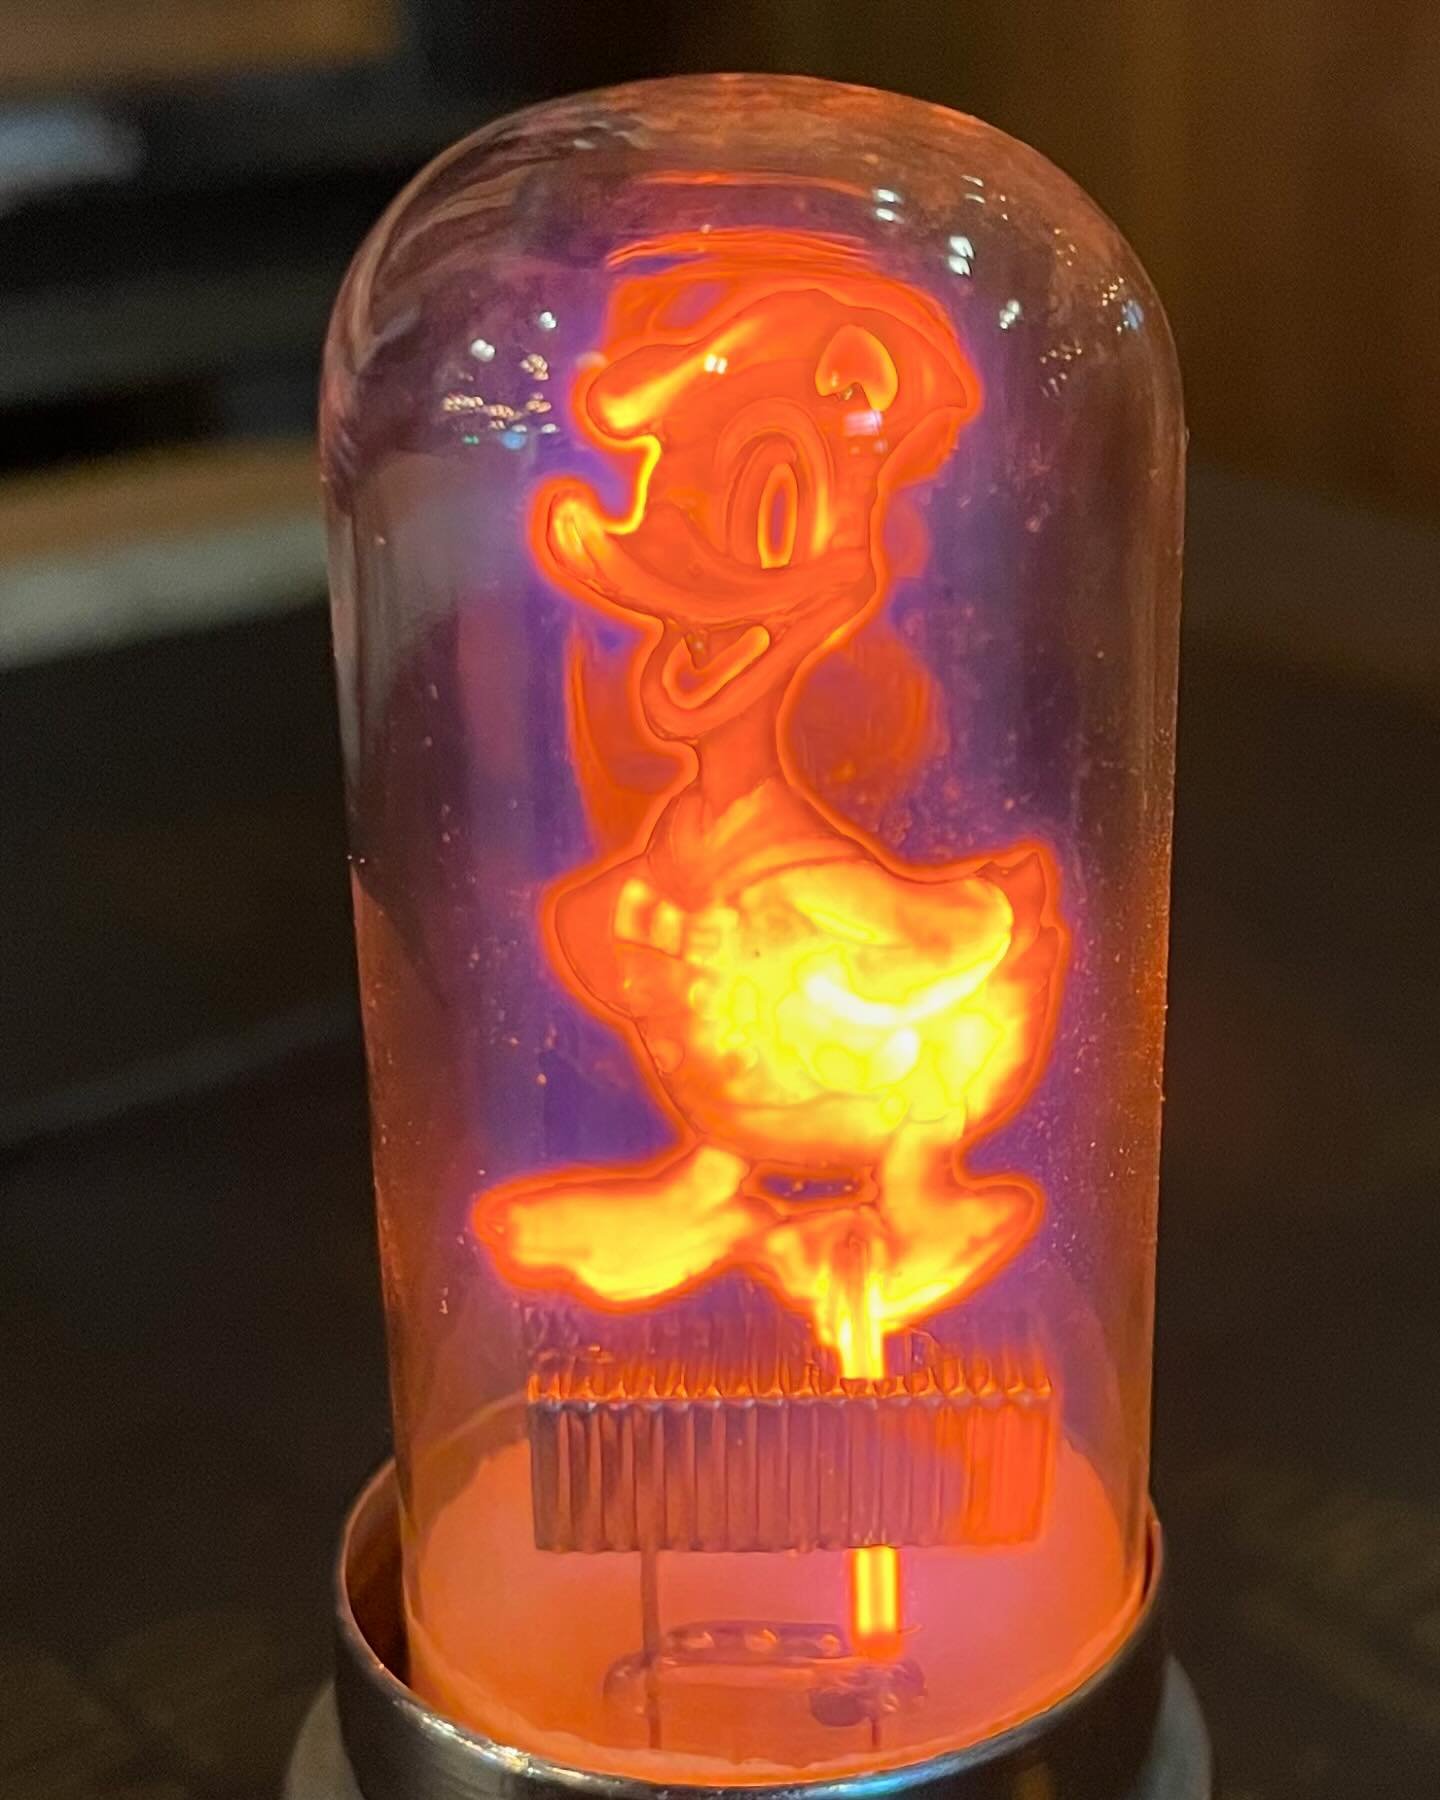 I&rsquo;ve had this hiding on a shelf in my office for years. Thought it might be time to let it see the light of day!

1930&rsquo;s Aerolux &ldquo;Donald Duck&rdquo; glow filament light bulb in original chrome lamp base with Bakelite/Catalan handle.